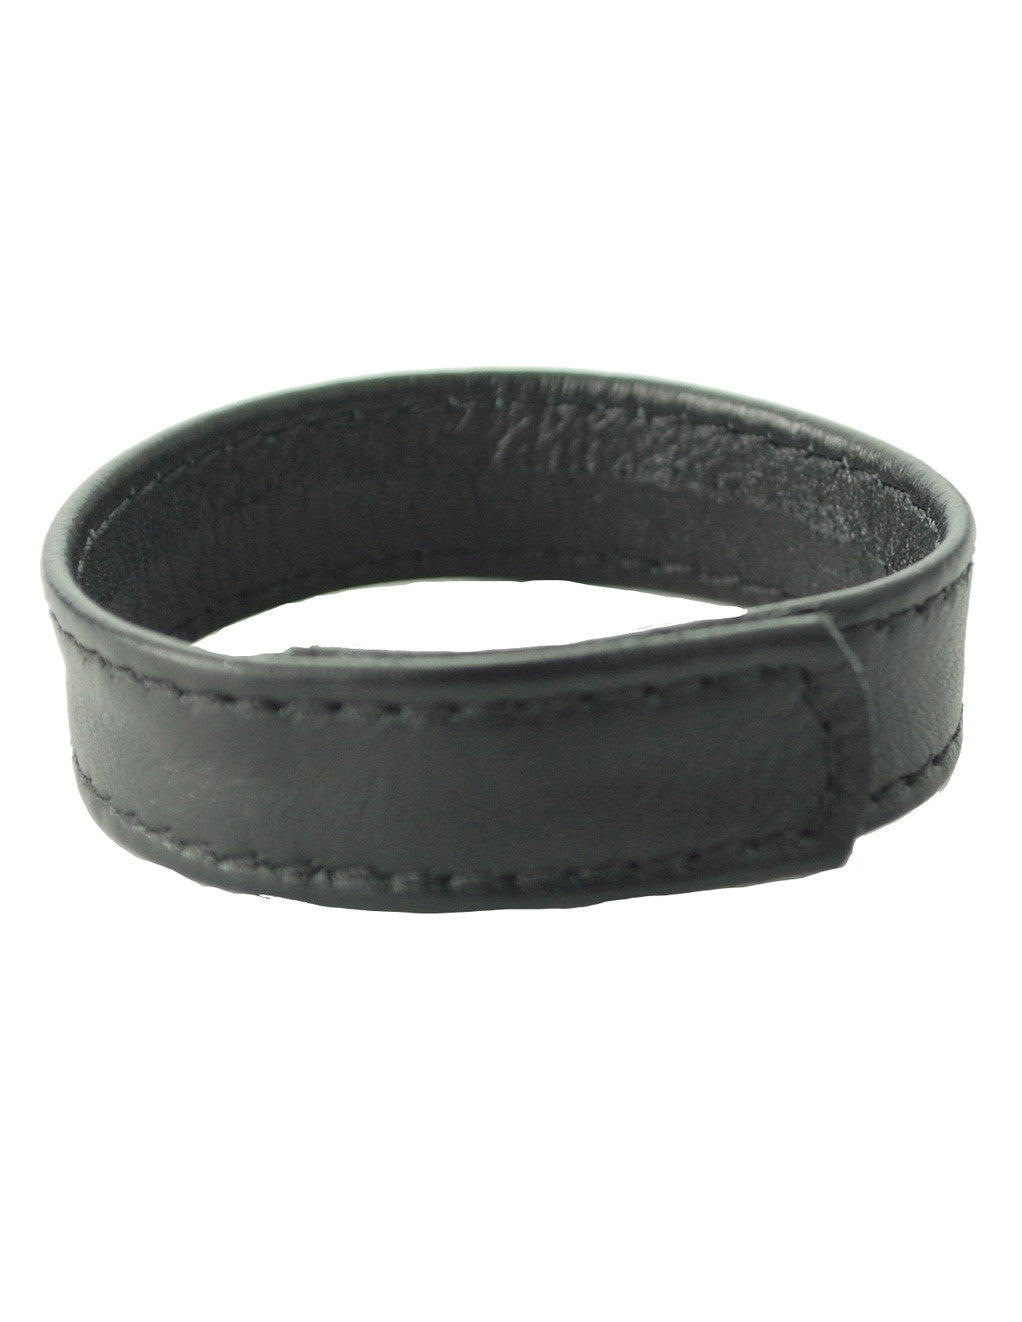 Spartacus Leather Velcro Cockring